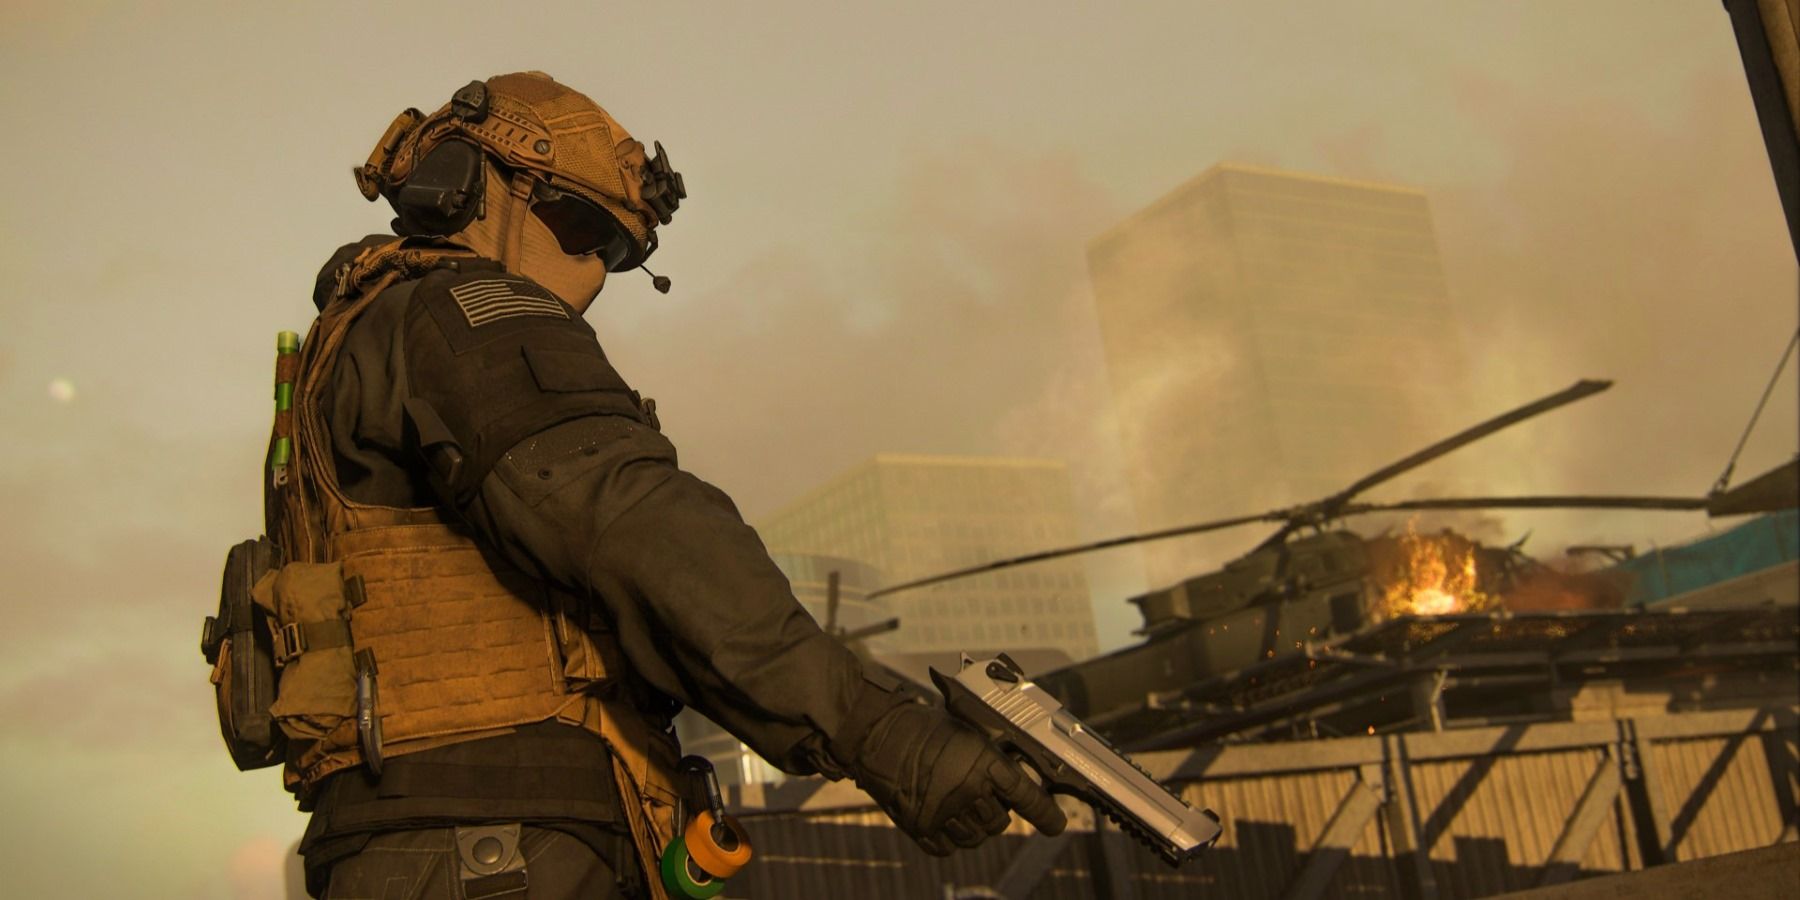 Call of Duty Modern Warfare 3: 'Call of Duty: Modern Warfare 3': See release  date of upcoming game - The Economic Times